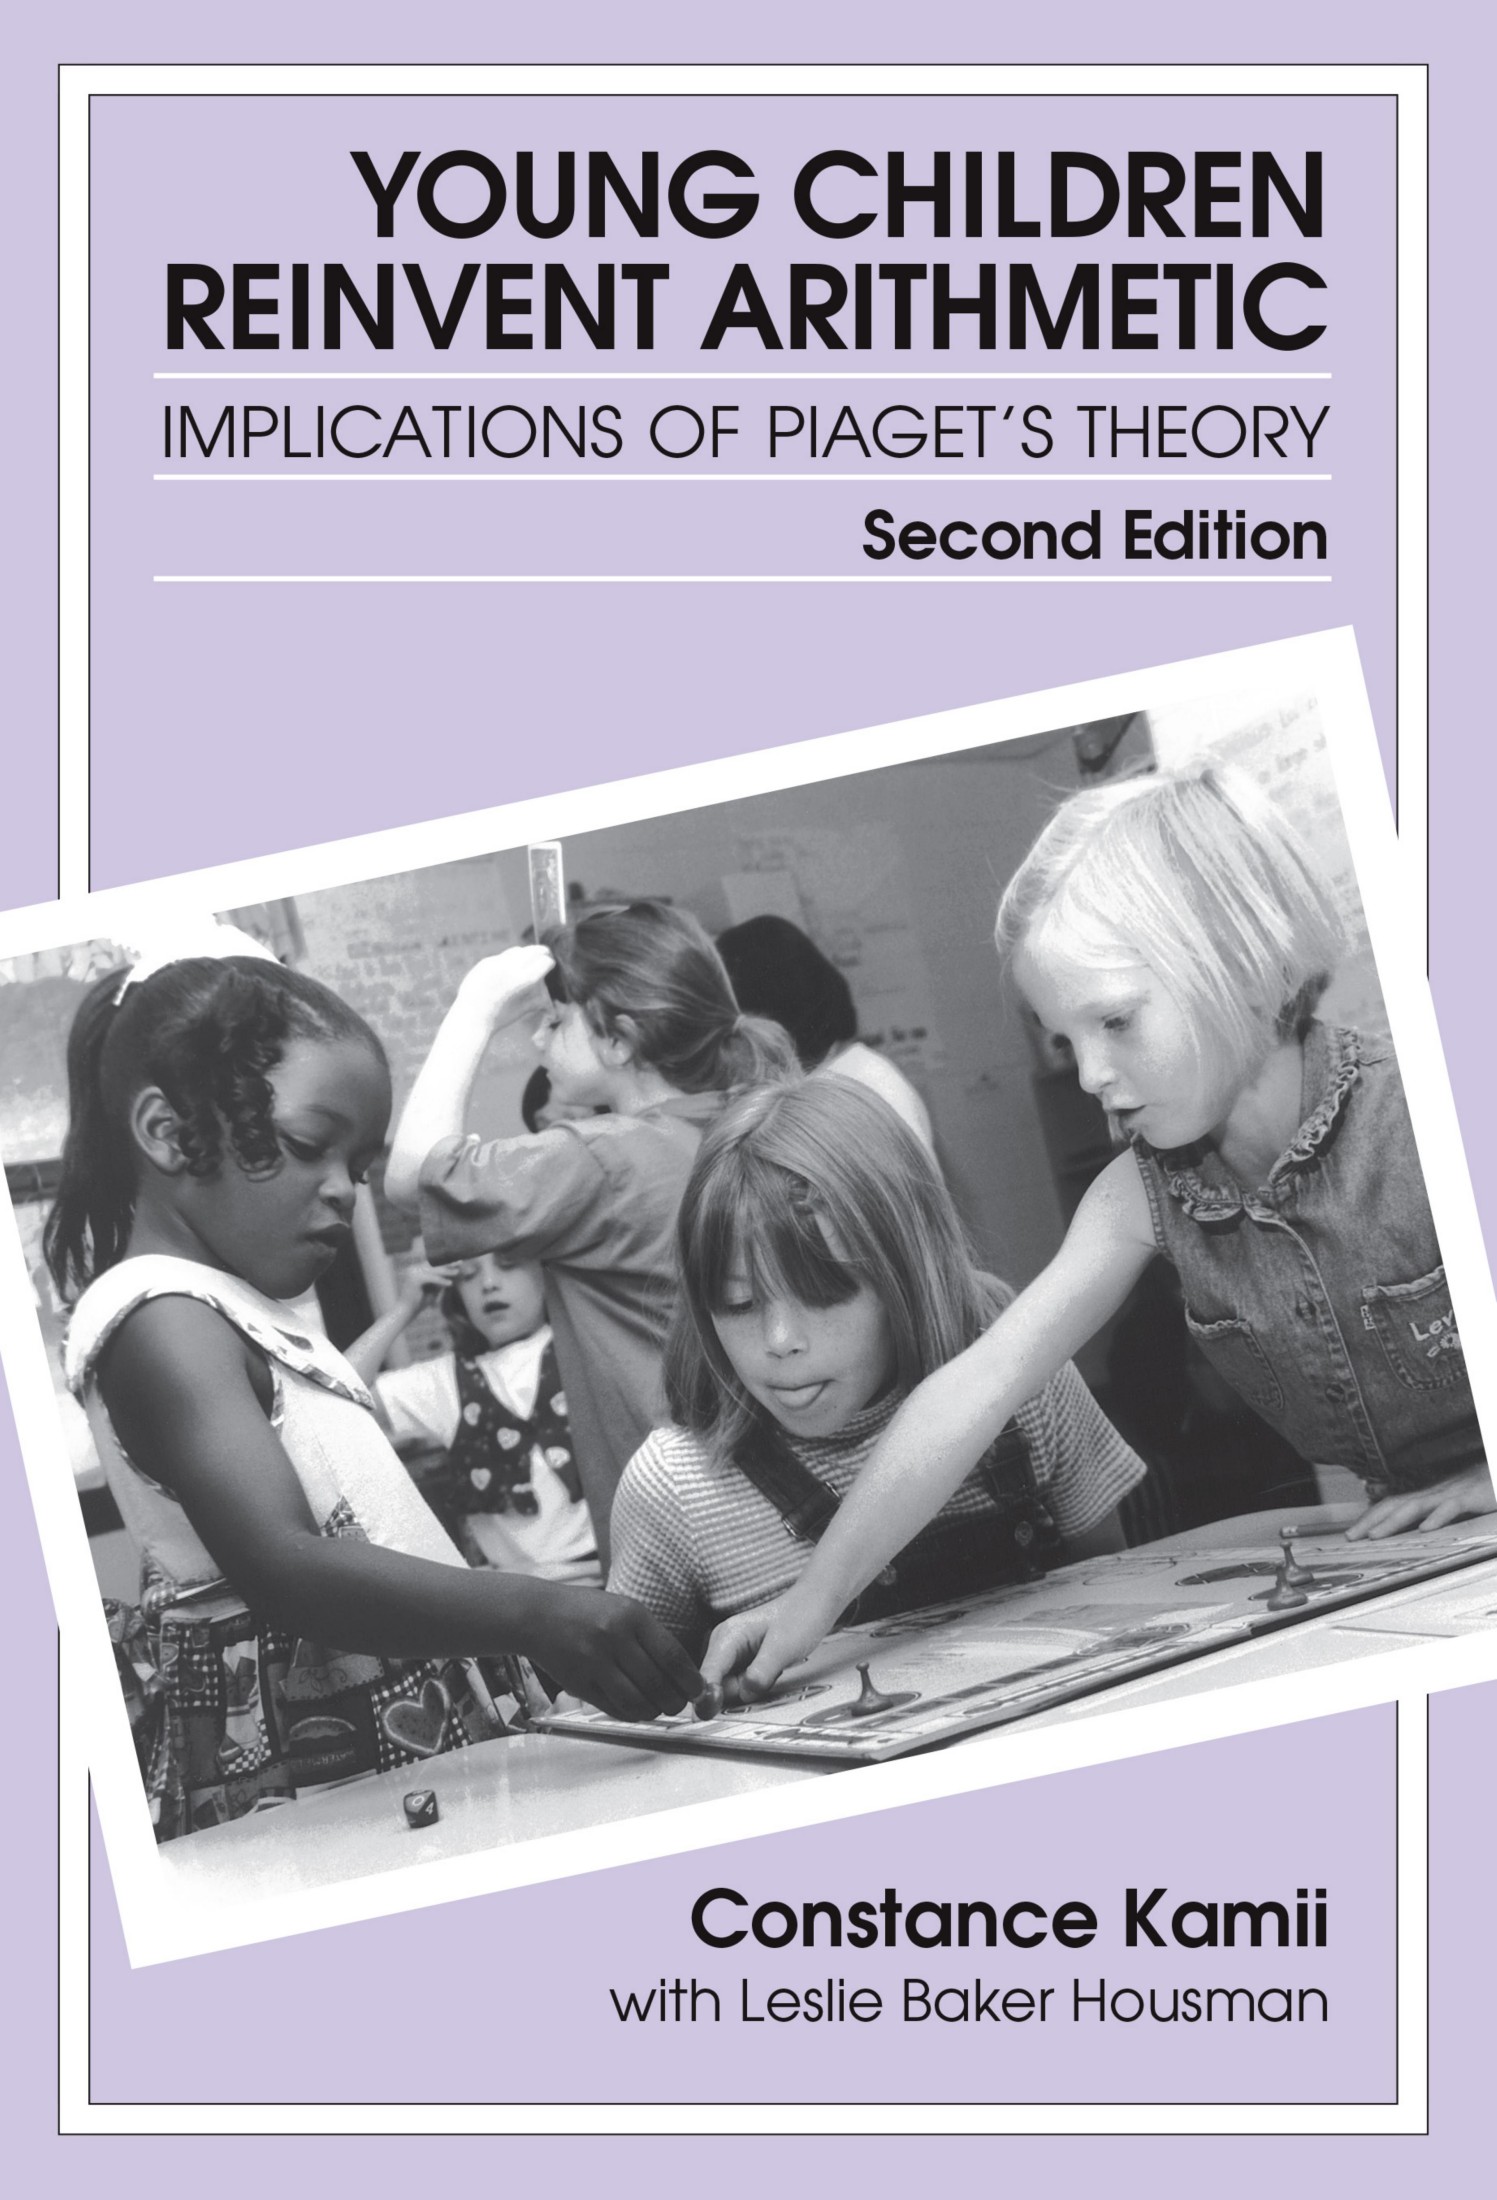 Young Children Reinvent Arithmetic: Implications of Piaget's Theory